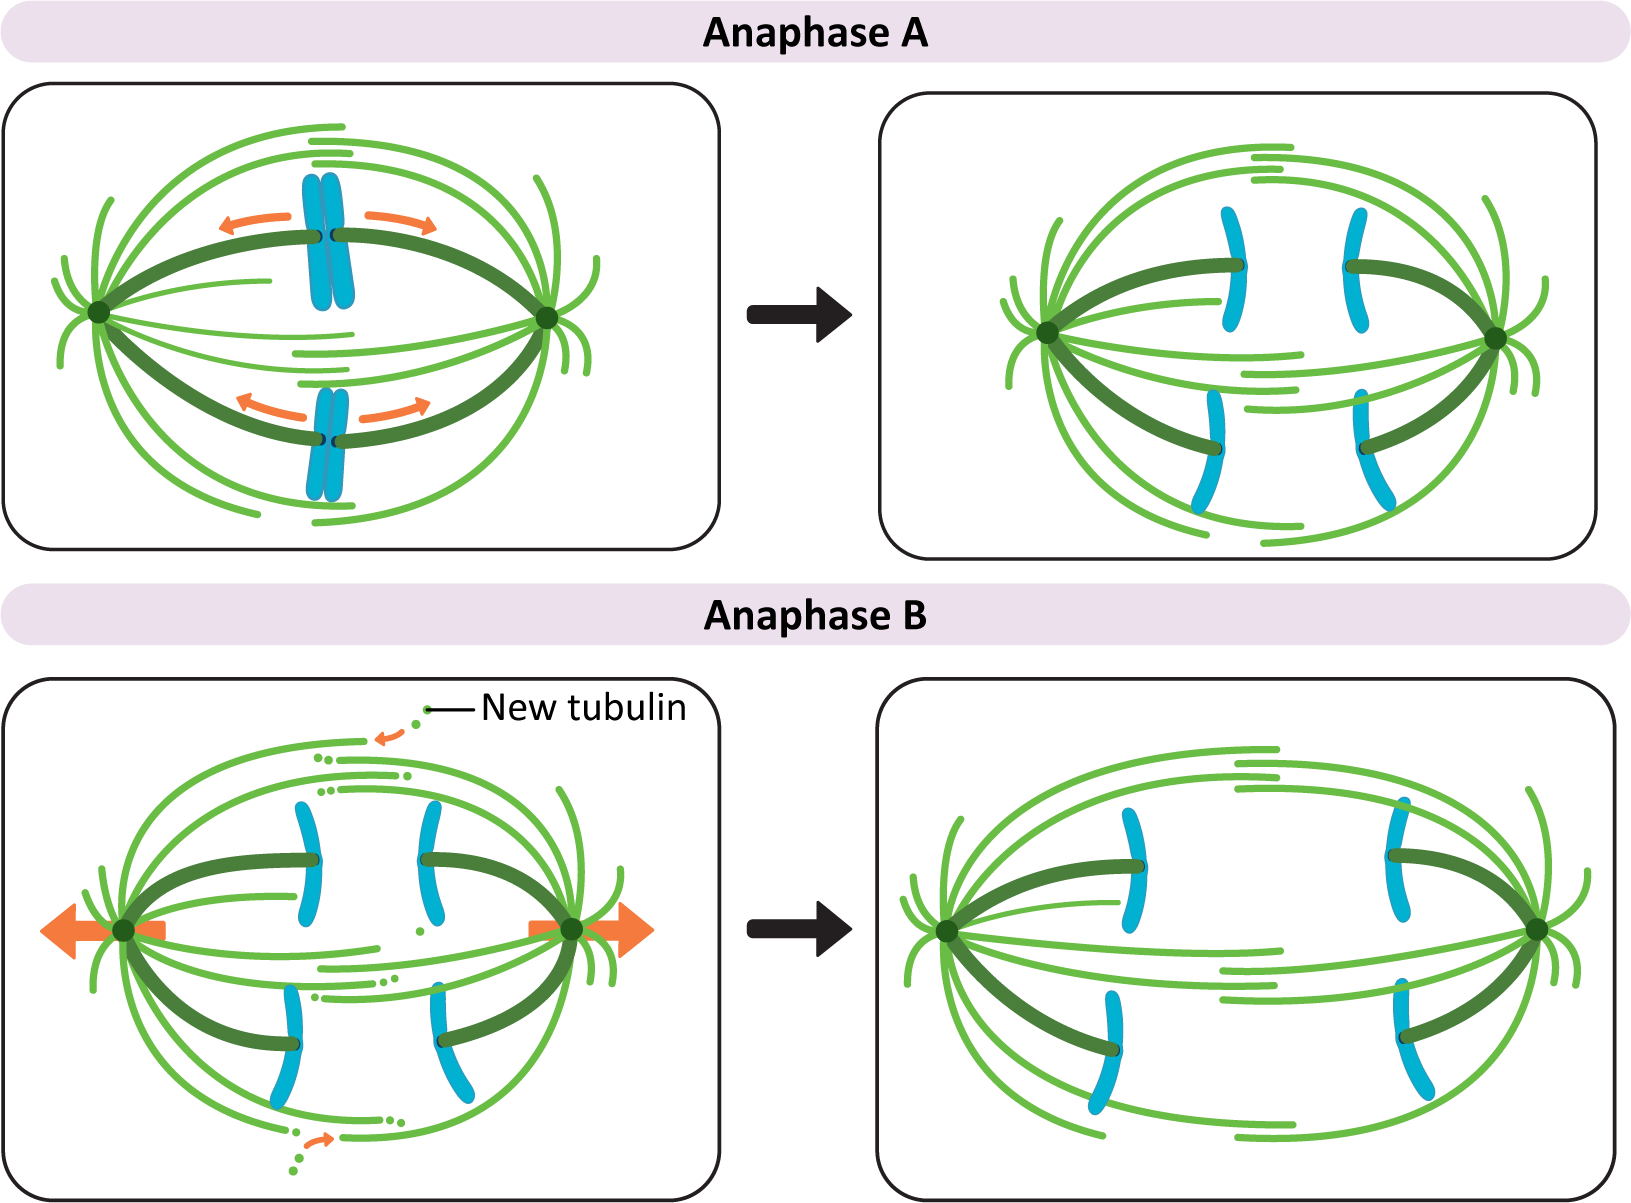 Diagram of anaphase A and B